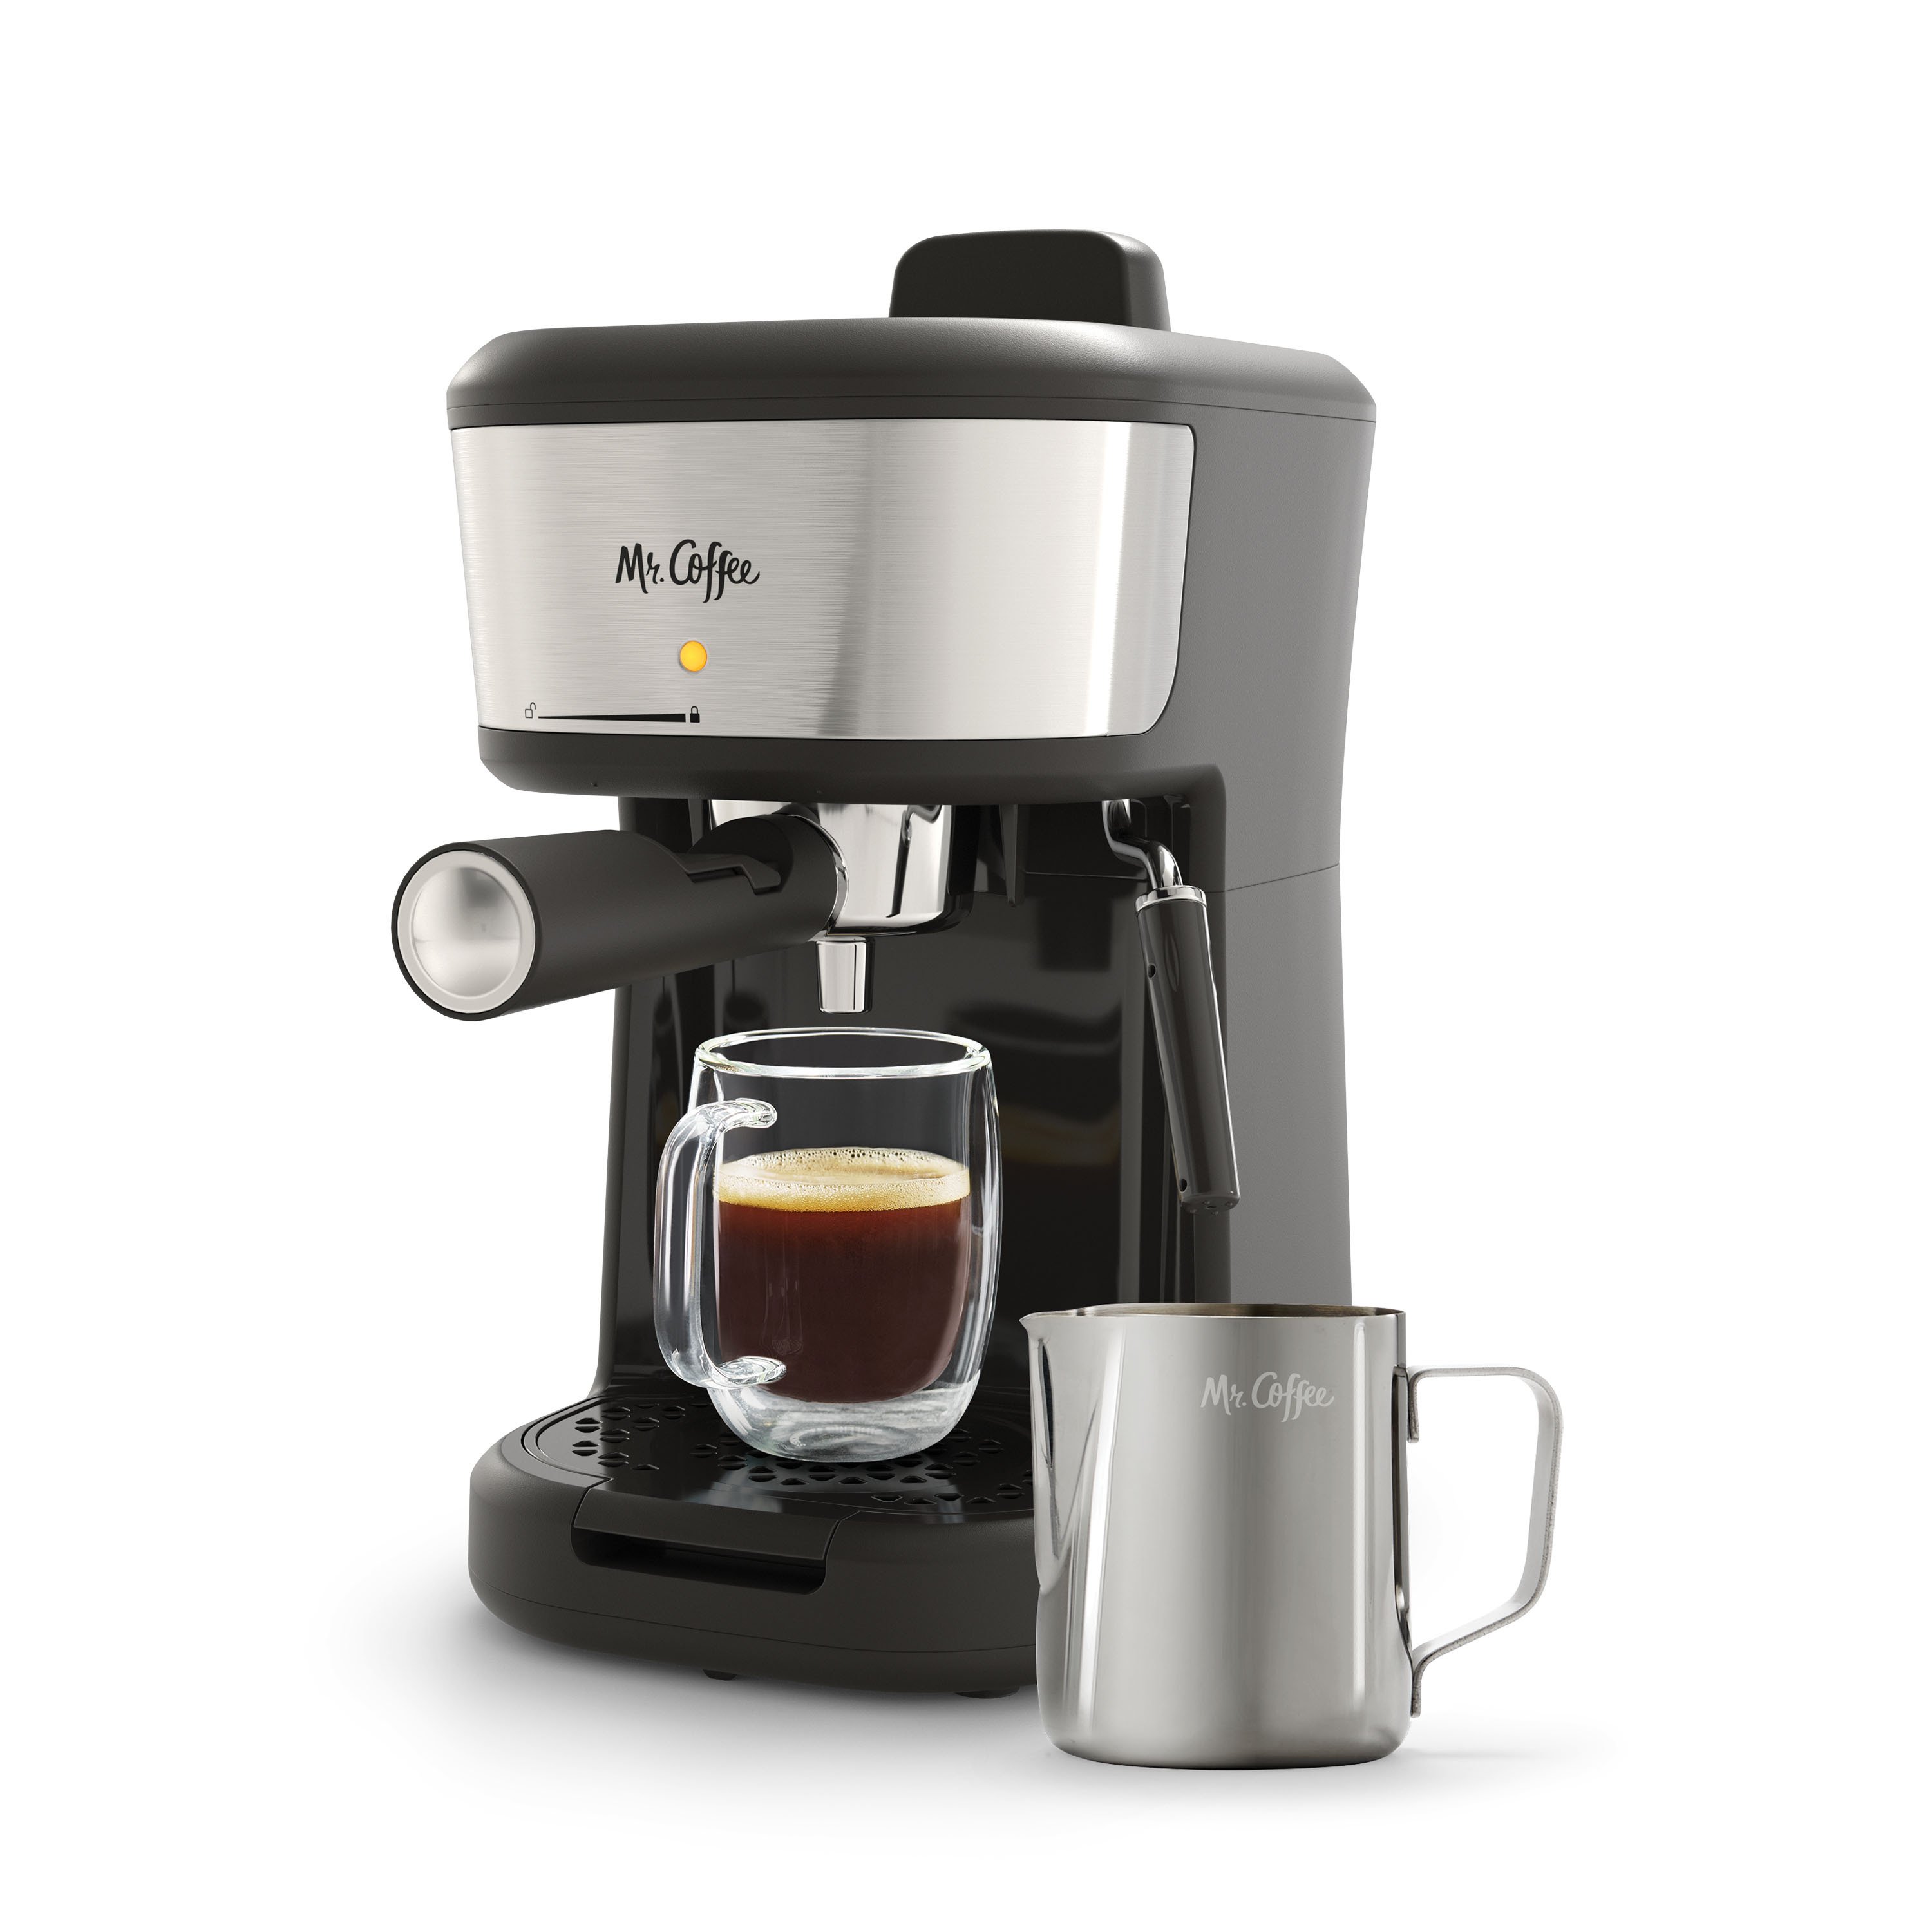 Mr. Coffee 4-Shot Steam Espresso, Cappuccino, and Maker with Stainless Steel Pitcher - Kitchen & Dining at H-E-B